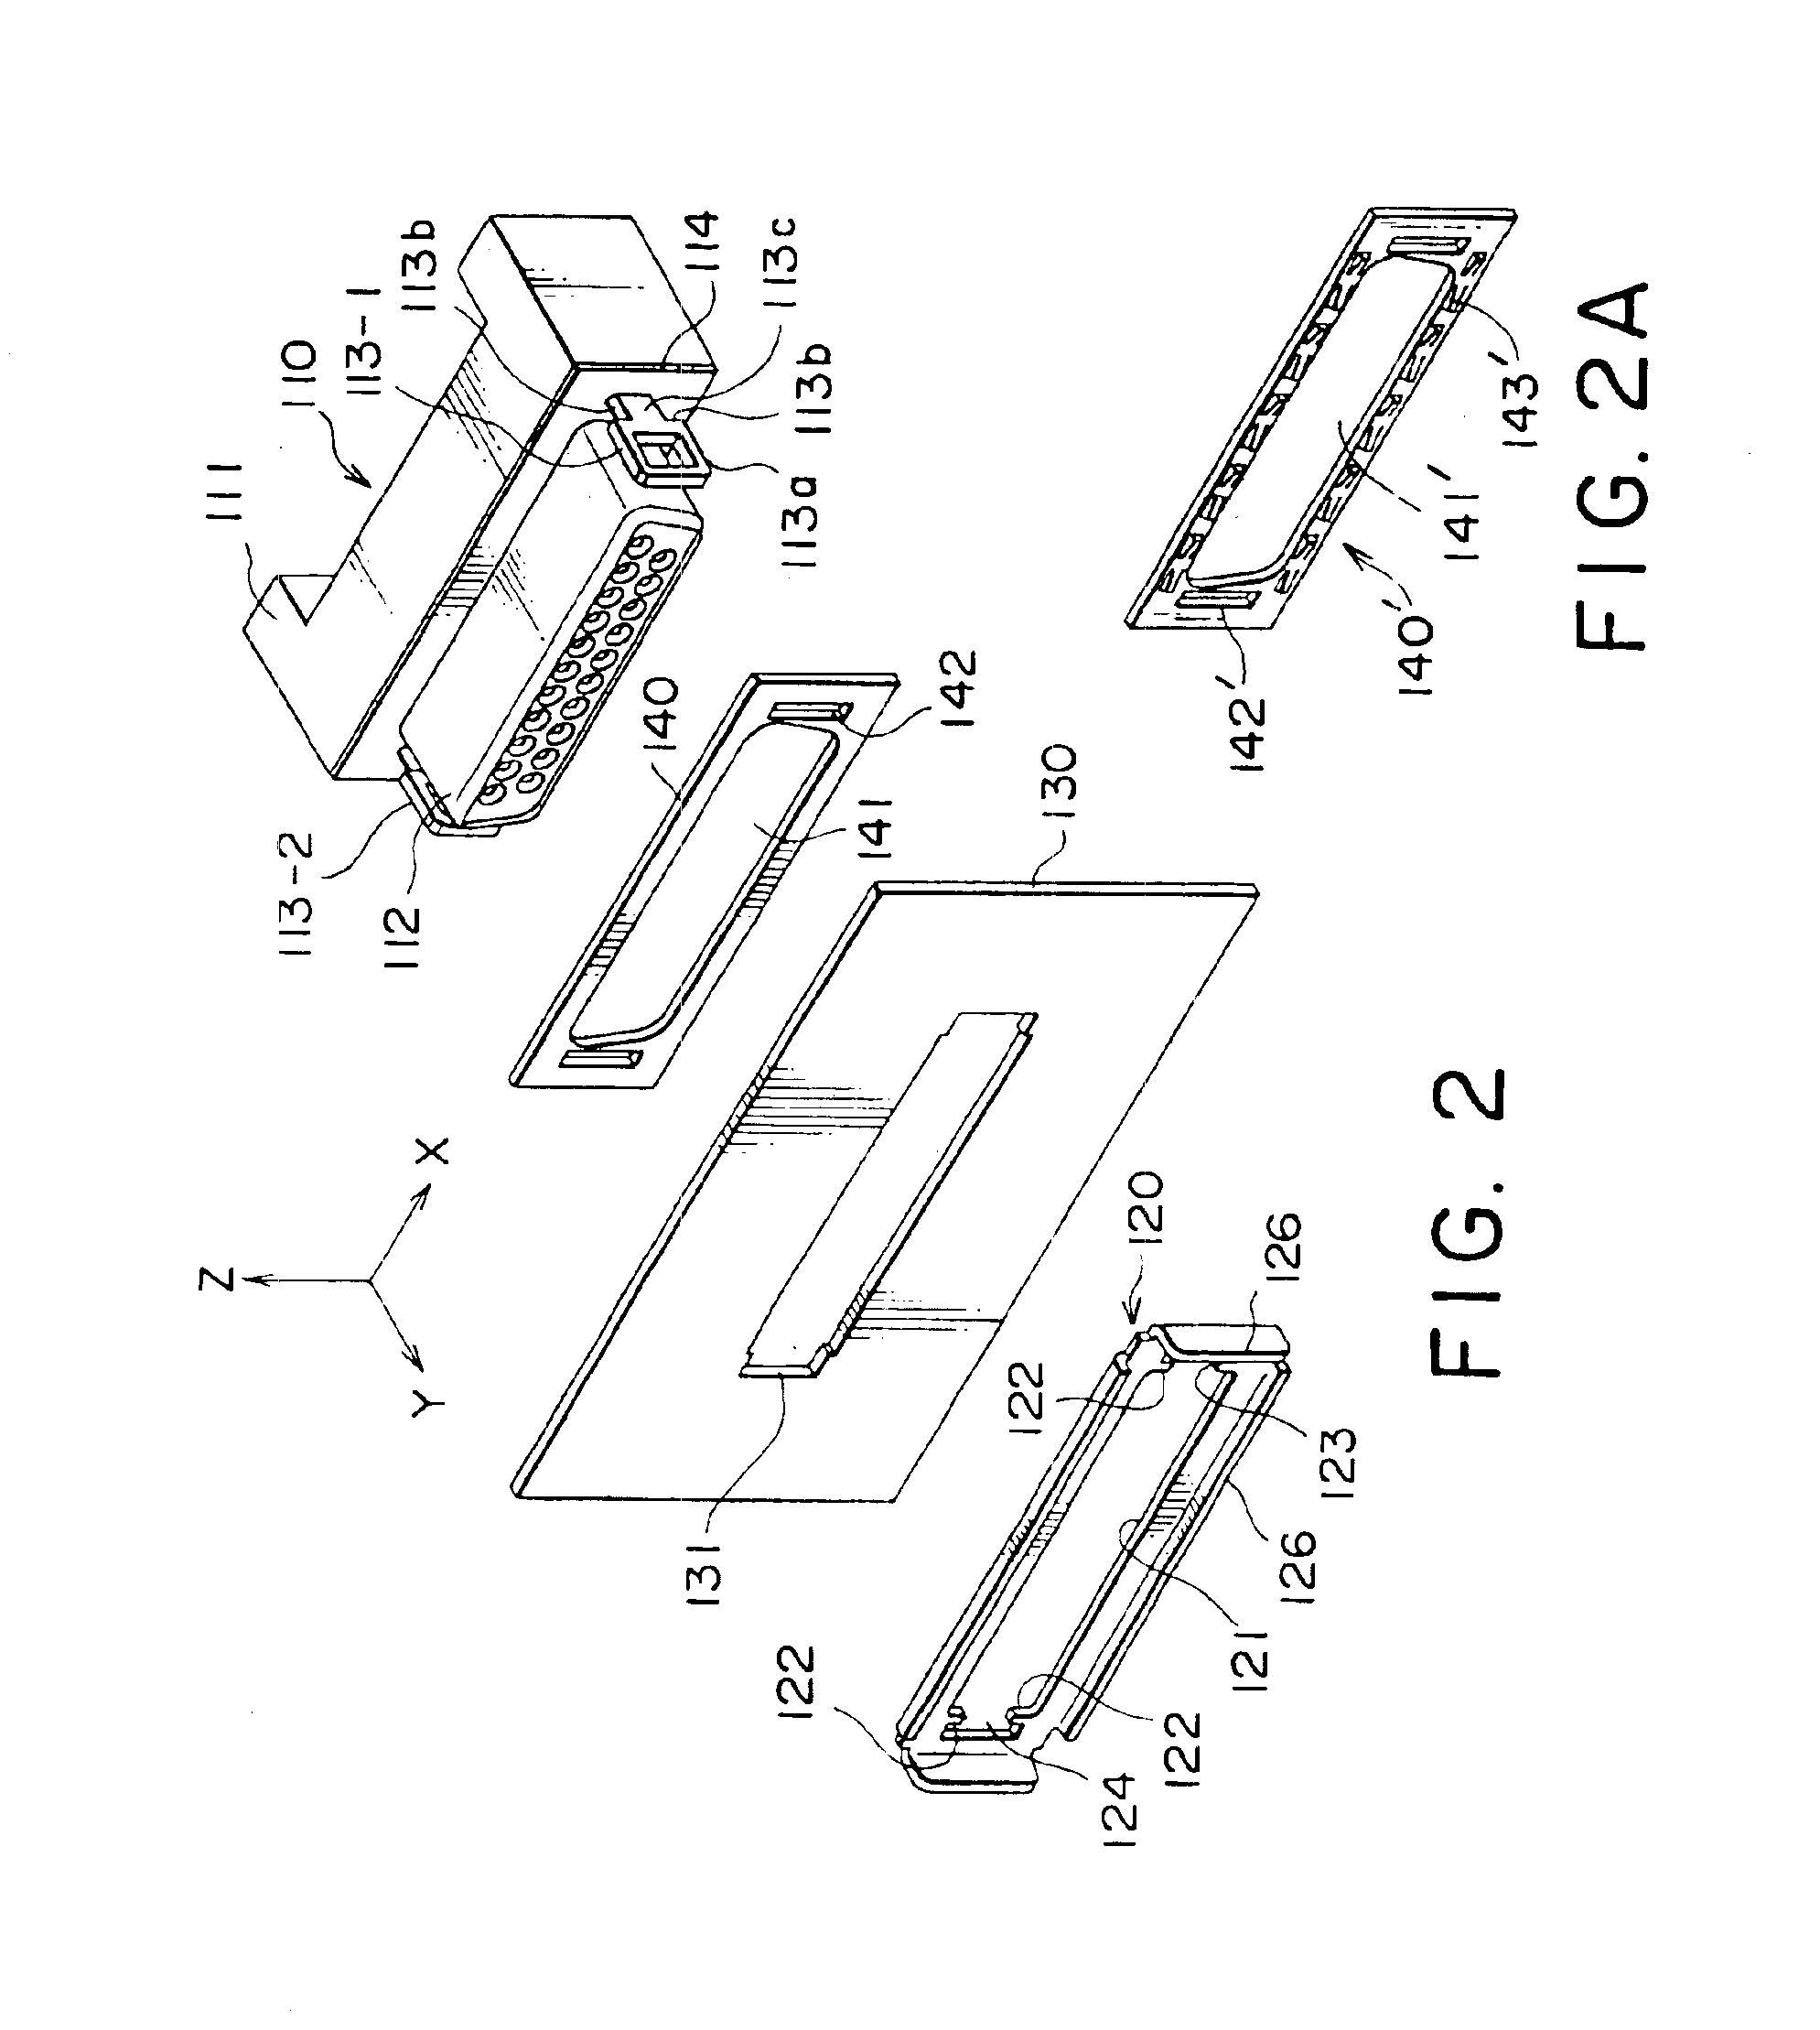 Combination of device and retainer clip for retaining the device through an open window in panel